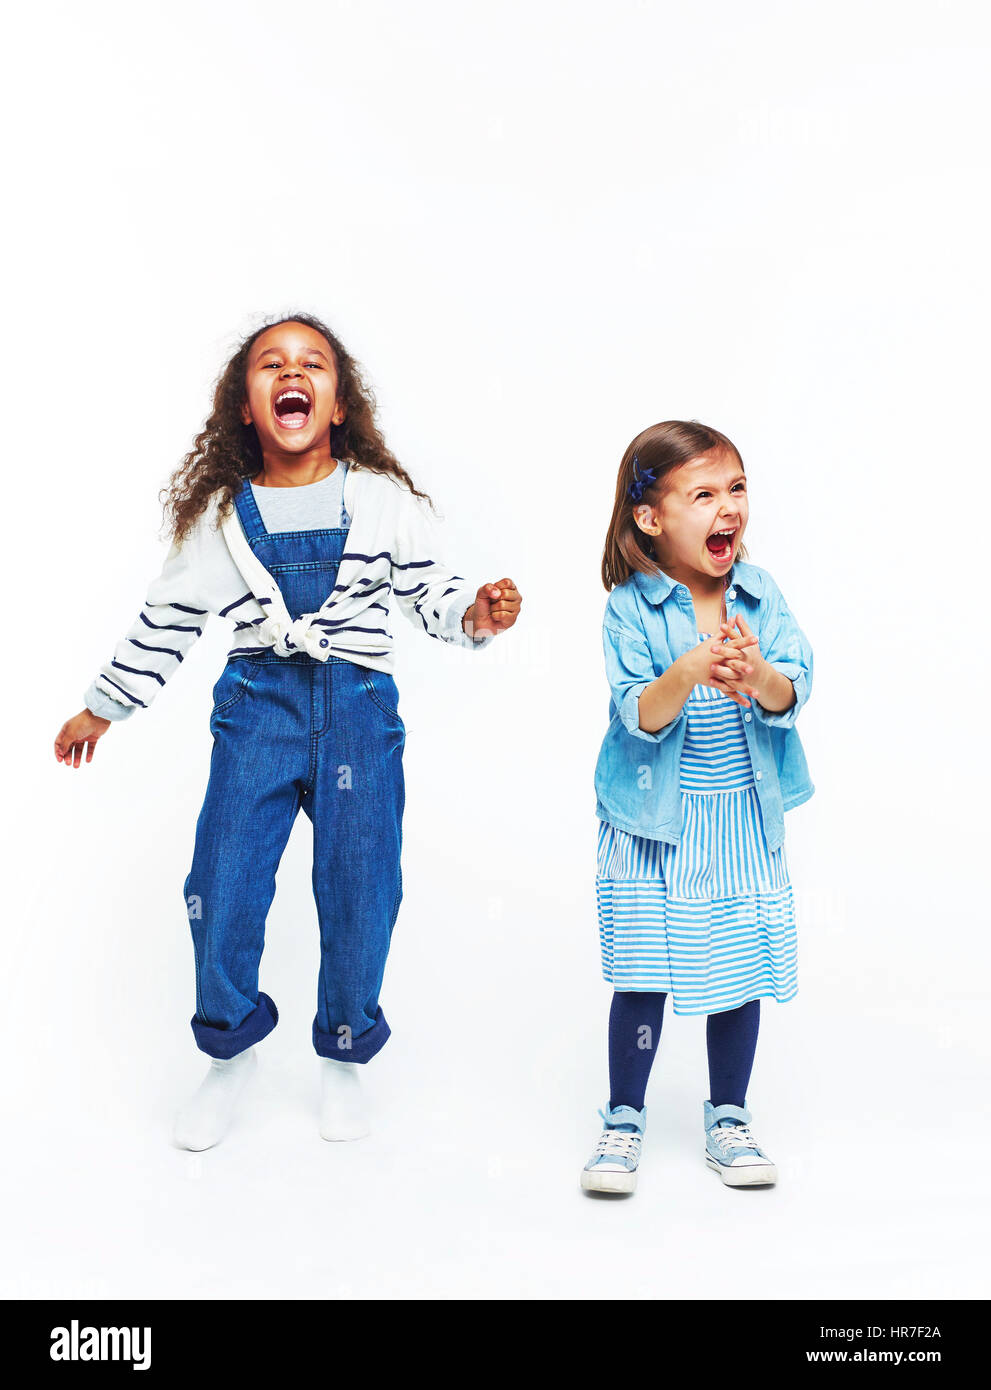 Full body portrait of two separate girls isolated on white, both dressed in colorful jeans clothes and screaming loudly with mouths open Stock Photo